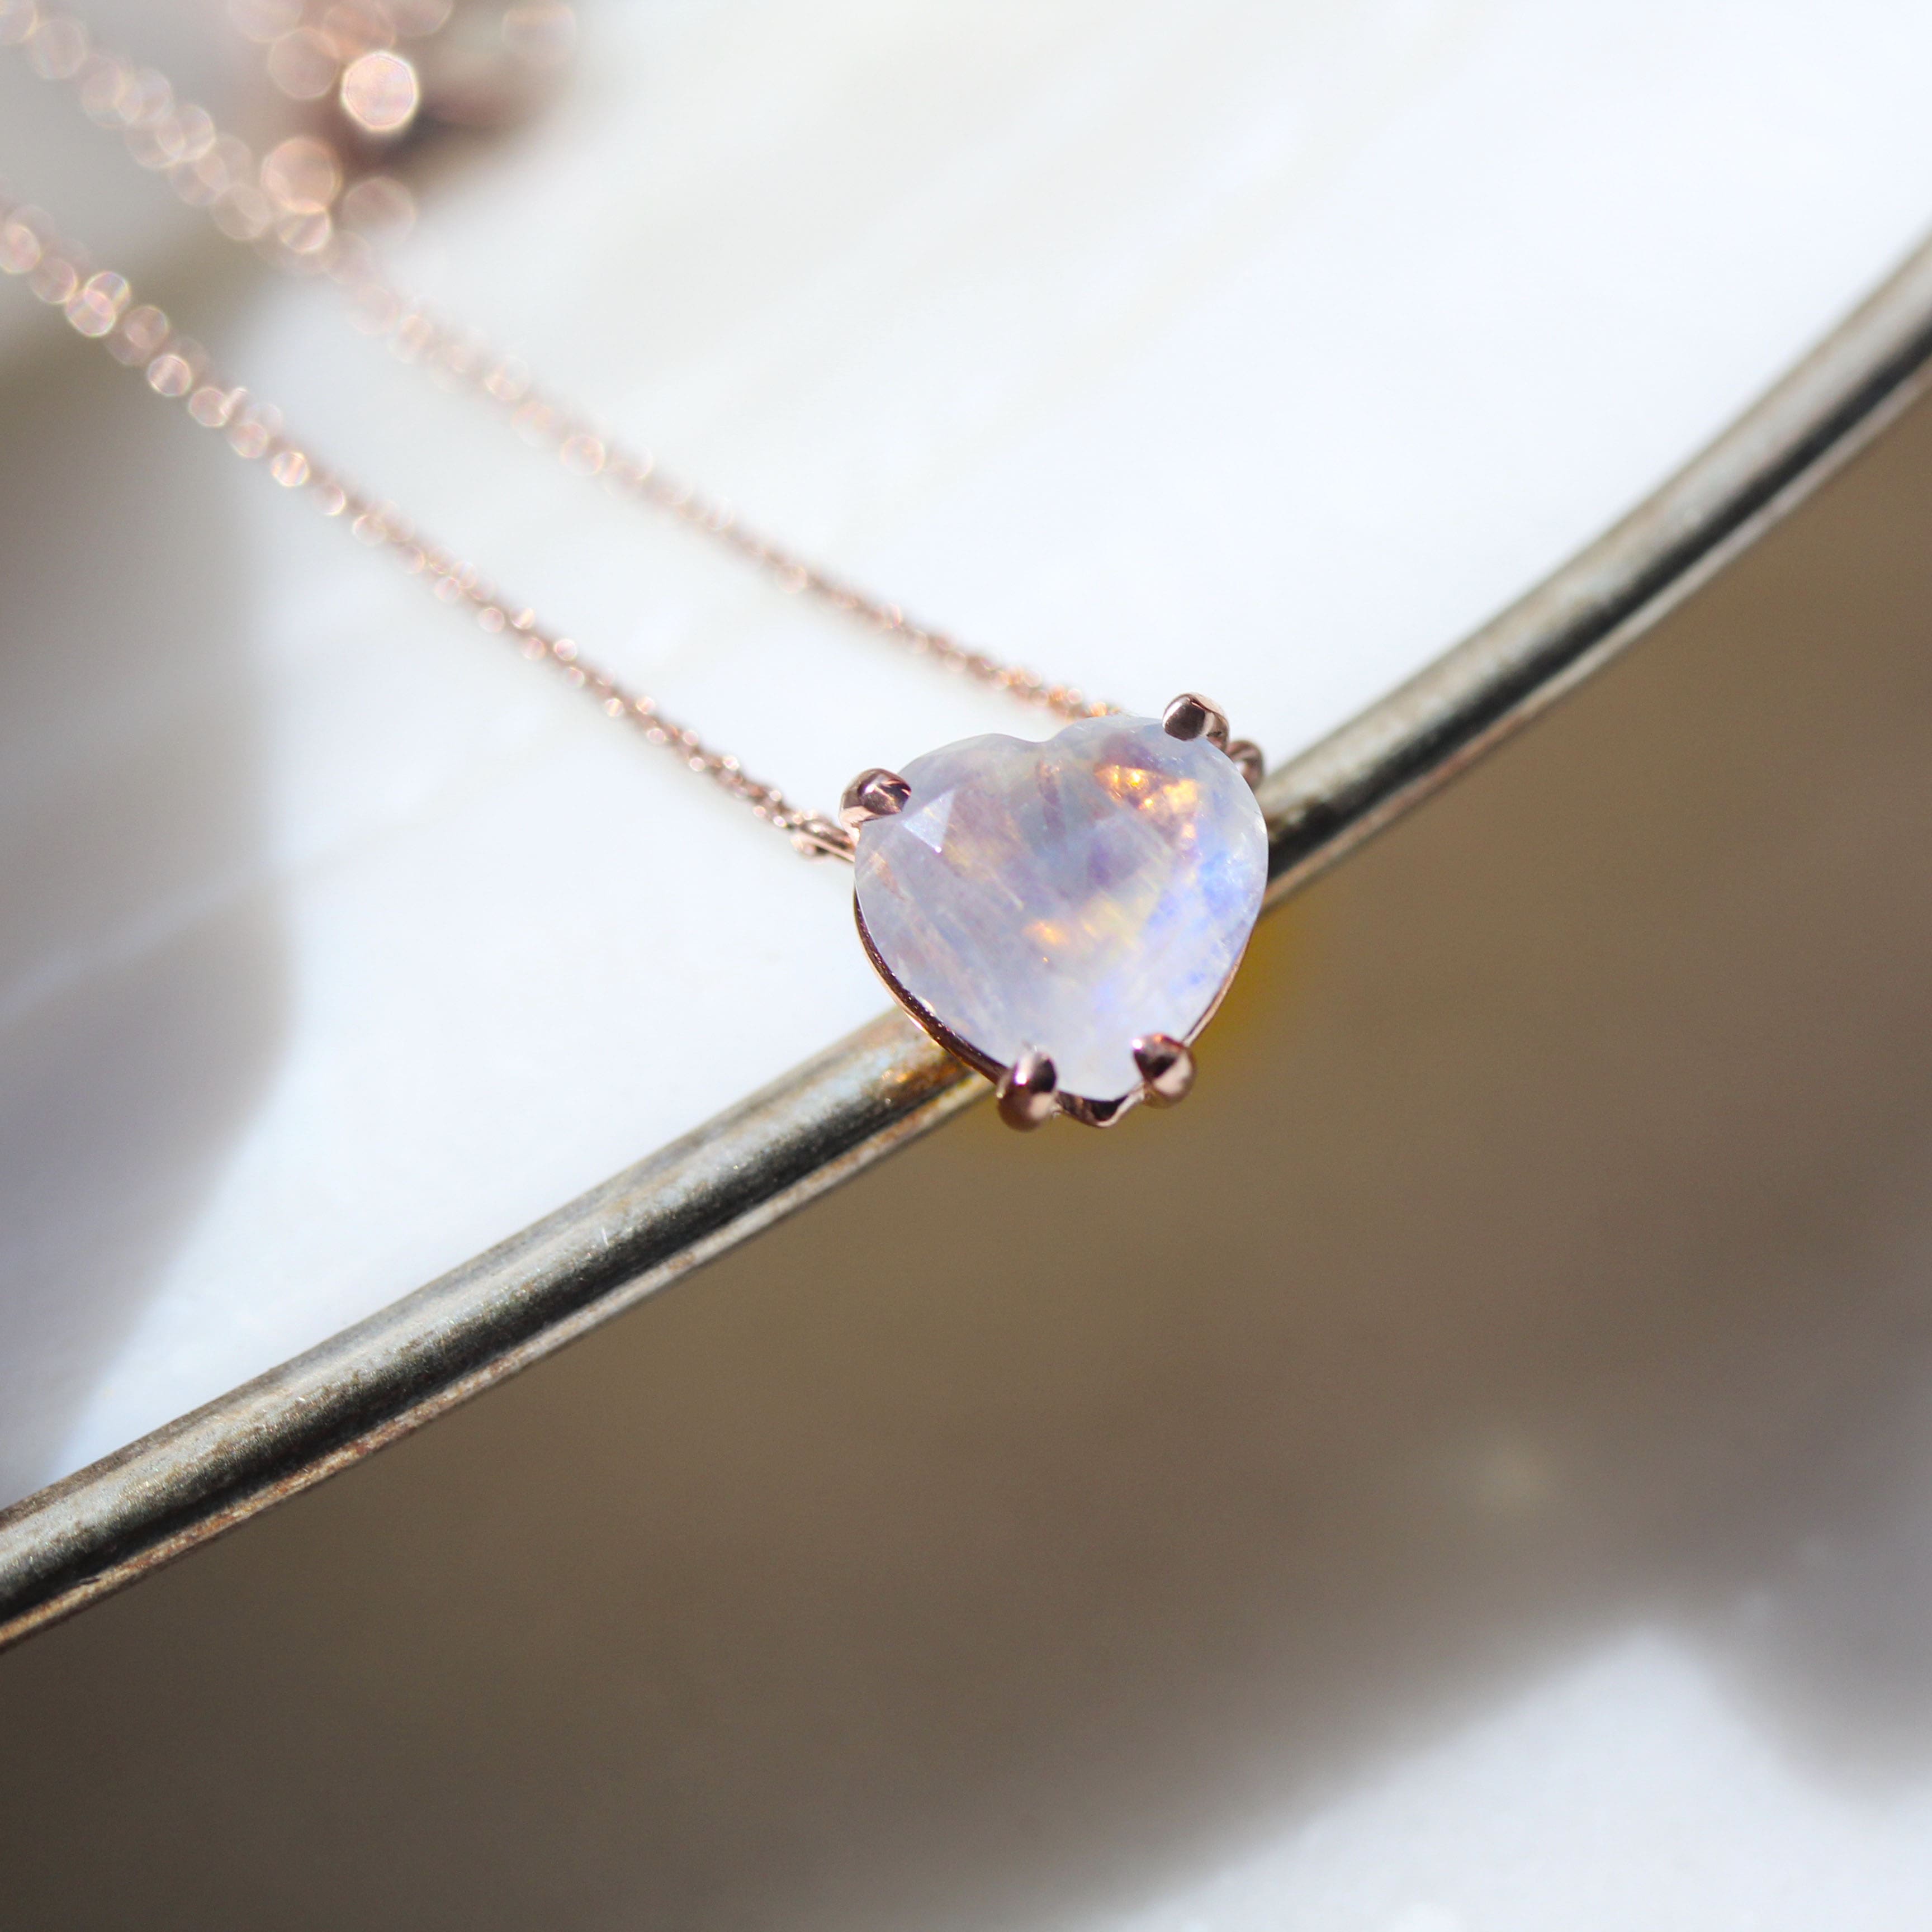 Amazon.com: Dainty Rainbow Moonstone Necklace | 925 Sterling Silver Necklace  Pendant | Handmade Moonstone Gemstone Necklace | Pagan Moonstone Jewelry  Gift for Women | Blue Moonstone Healing Crystal Pendant : Handmade Products